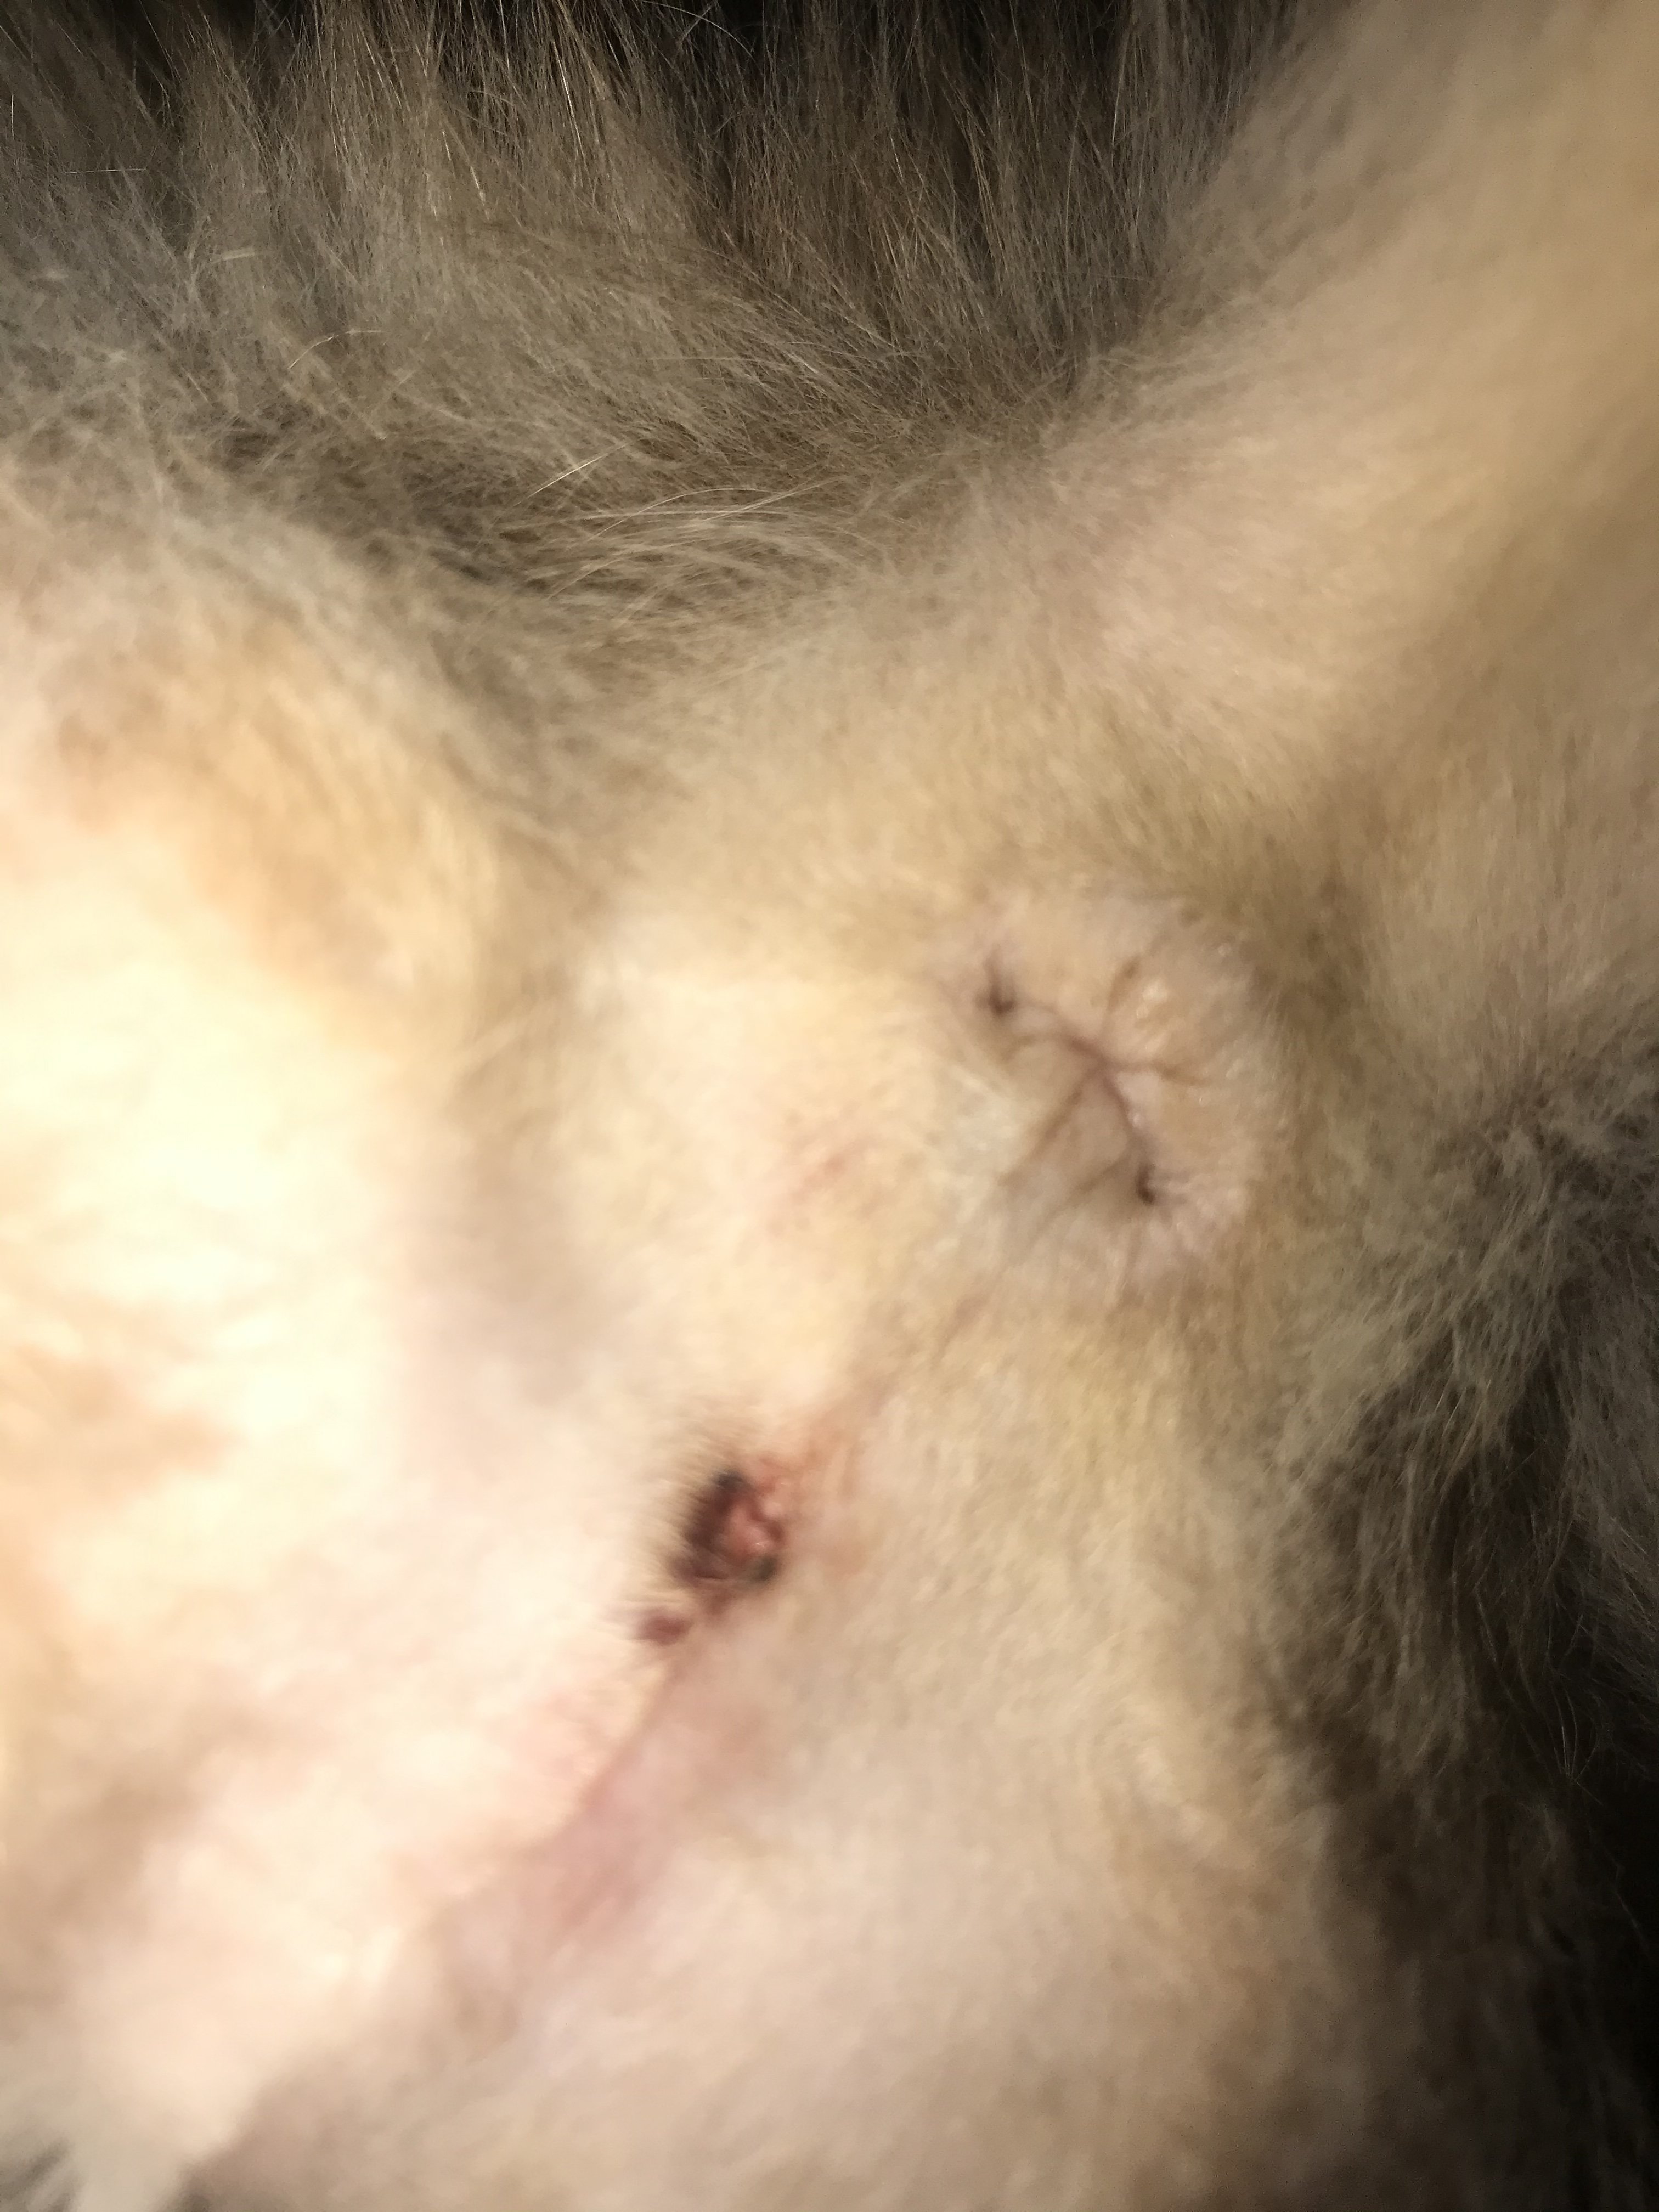 Cat with PPU bleeding slightly after peeing (TW cat butt/surgery pic